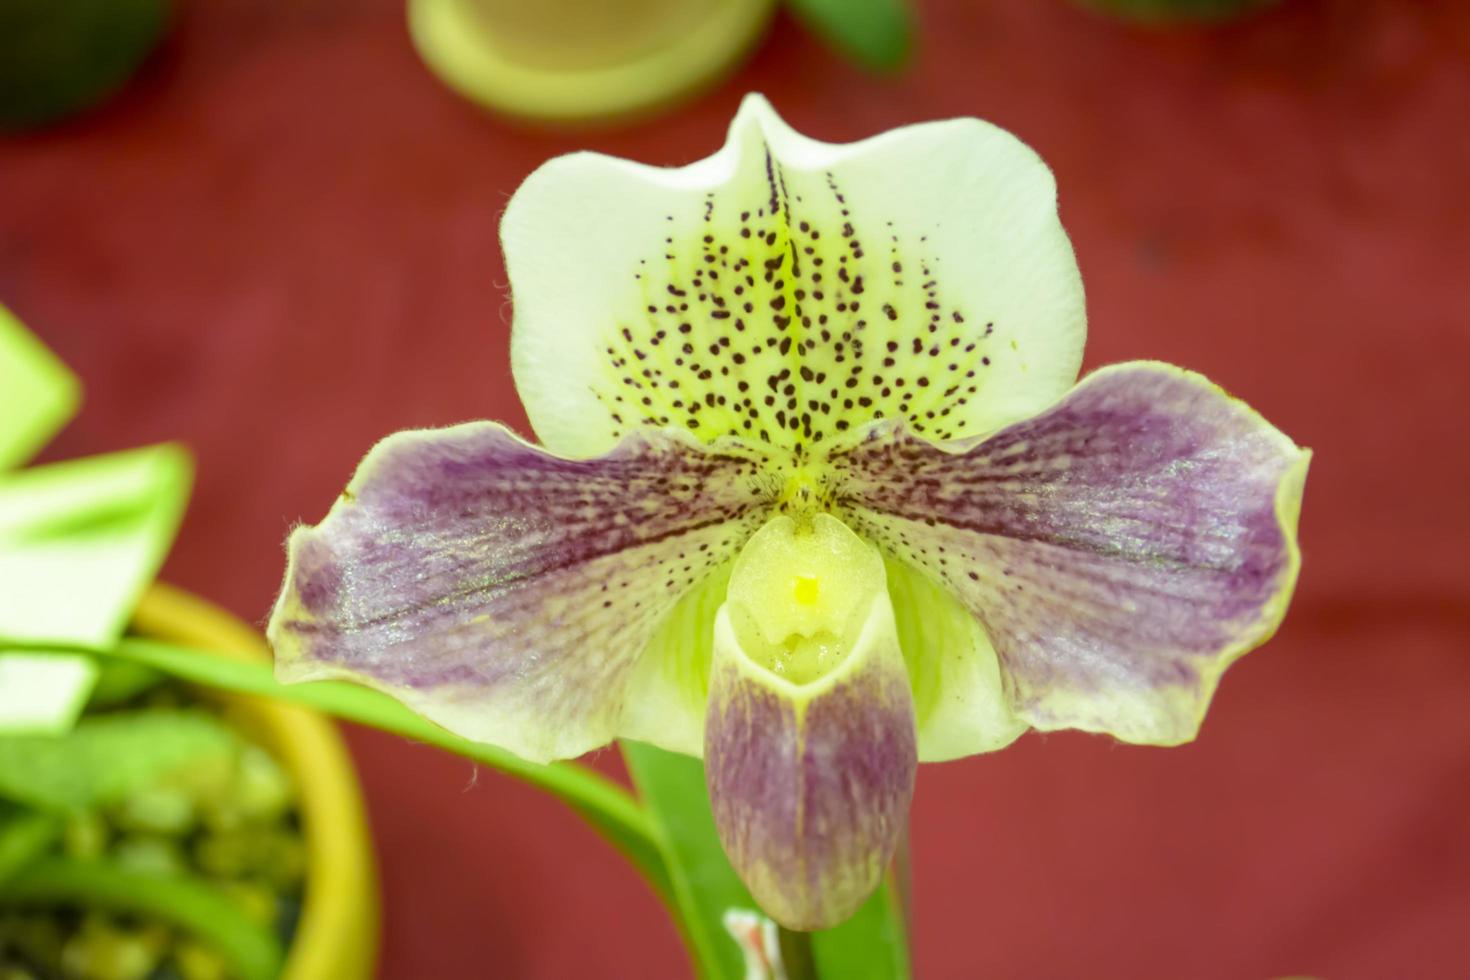 Paphiopedilum, often called the Venus slipper, is a genus of the Lady slipper orchid subfamily Cypripedioideae of the flowering plant family Orchidaceae. photo